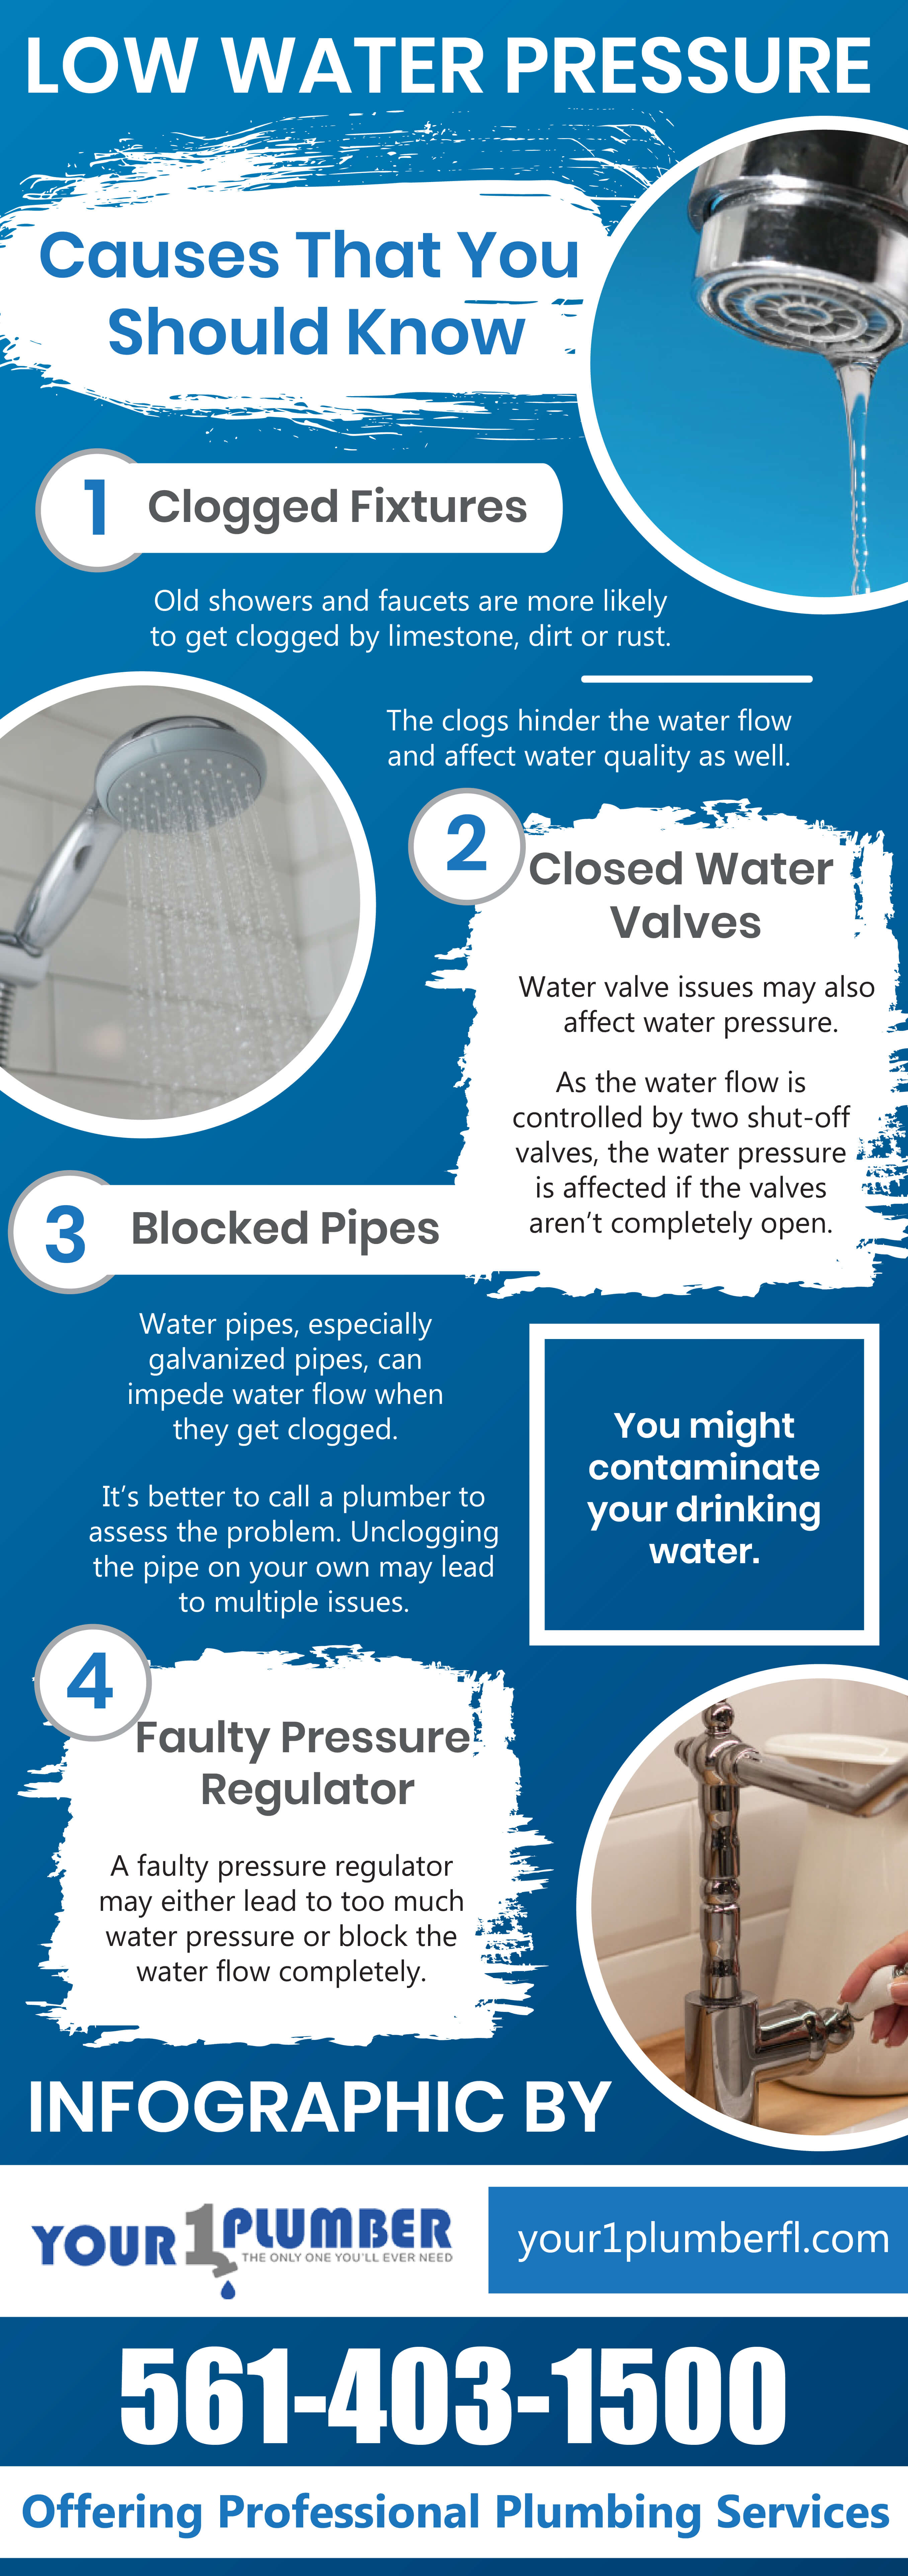 low-water-pressure-causes-you-should-know